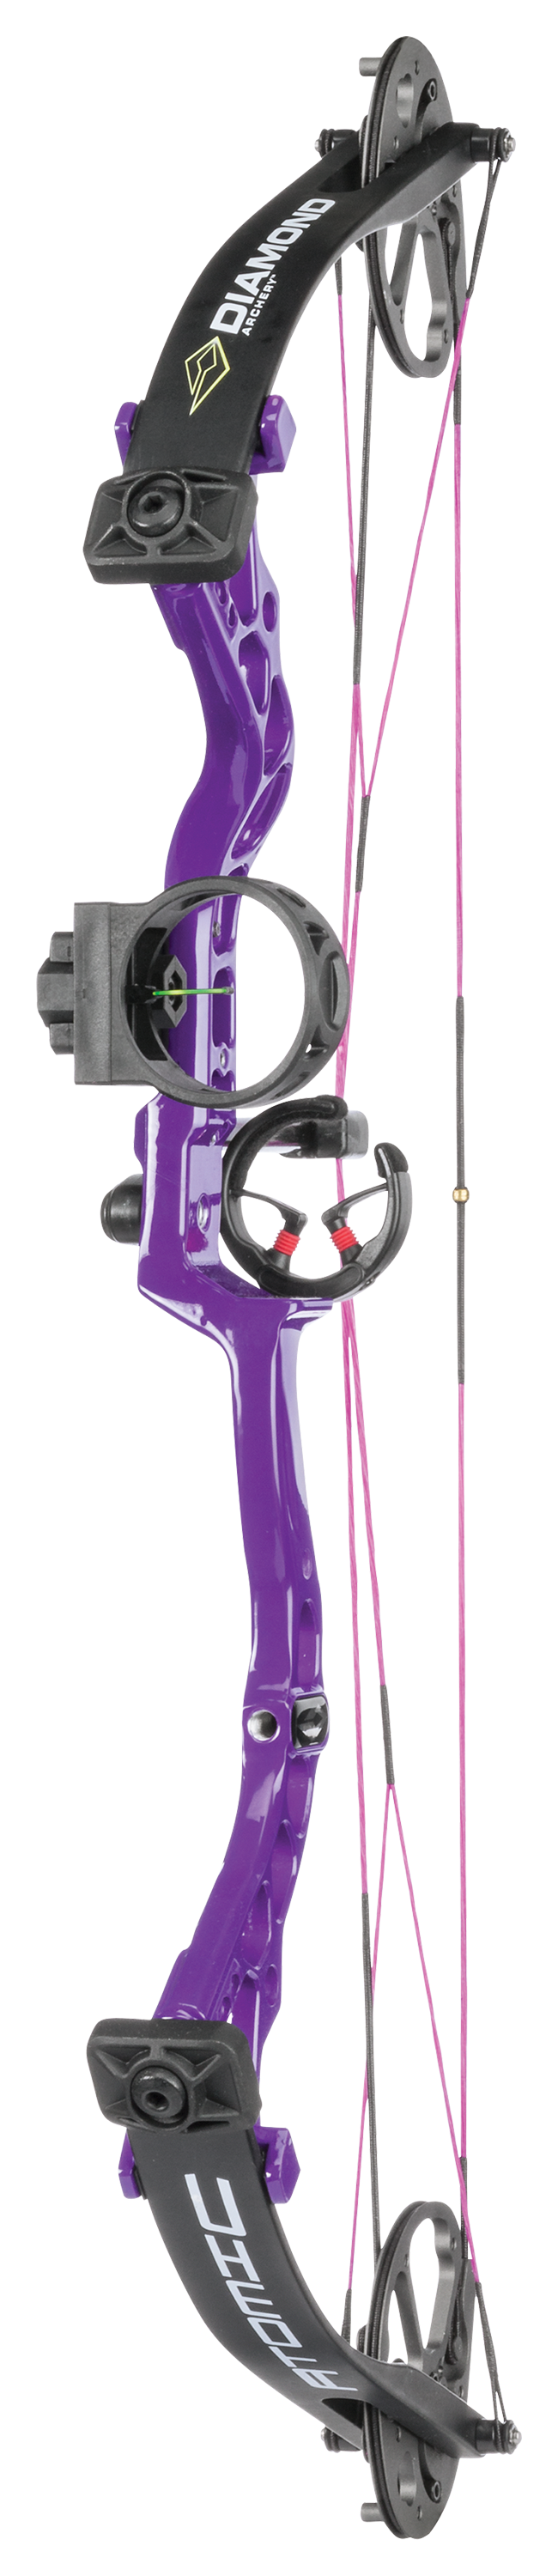 Diamond by Bowtech Atomic Youth Compound Bow Package - Right Hand - Purple